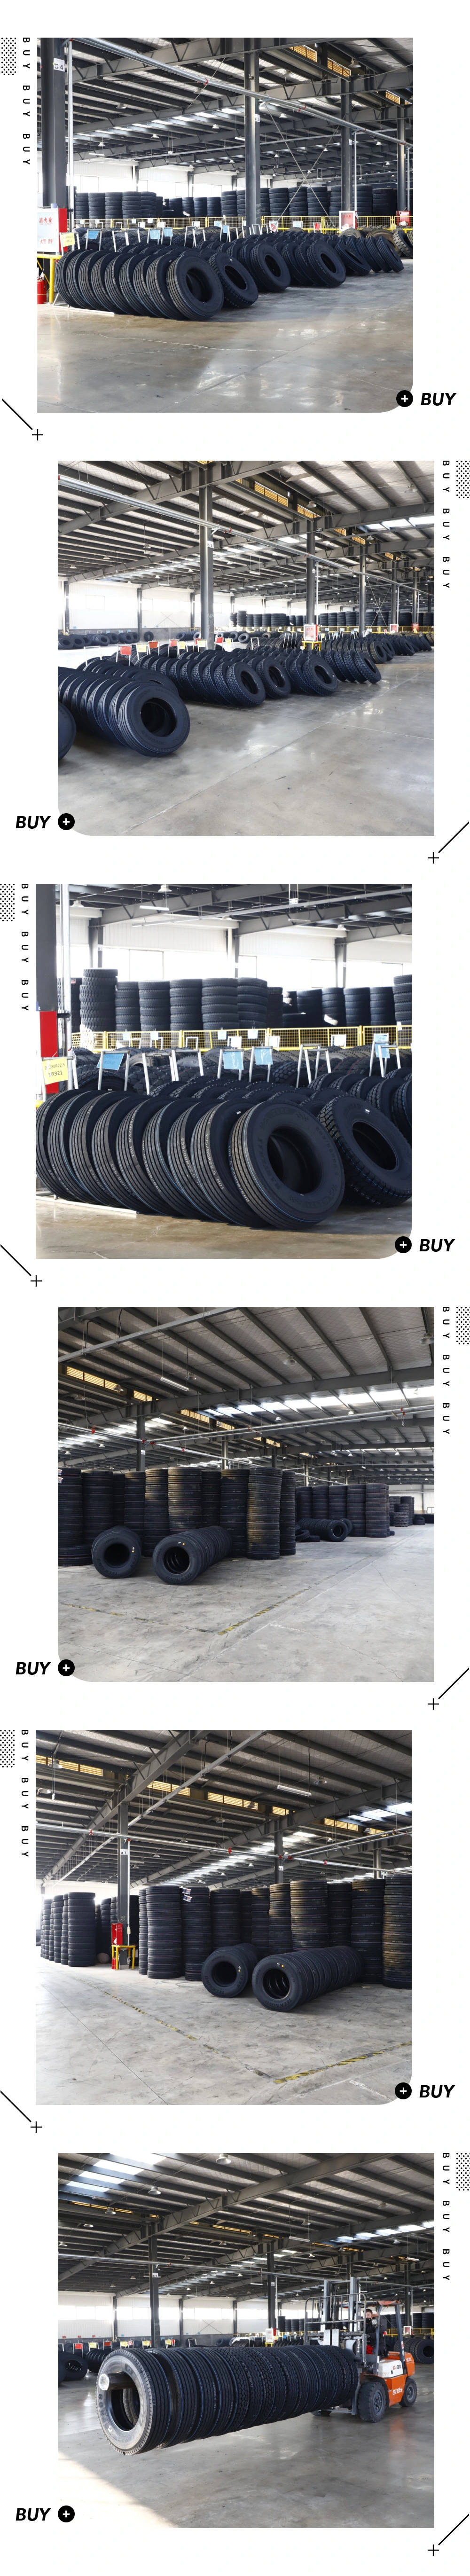 Low Price Gladstone Truck Tyre/Tires Centara/Boto/Winda/Joyroad Brand Car Tyre Can Mix Load with Passenger Car Tyre, Tube, Rims, Discount Heavy Duty Truck Tires